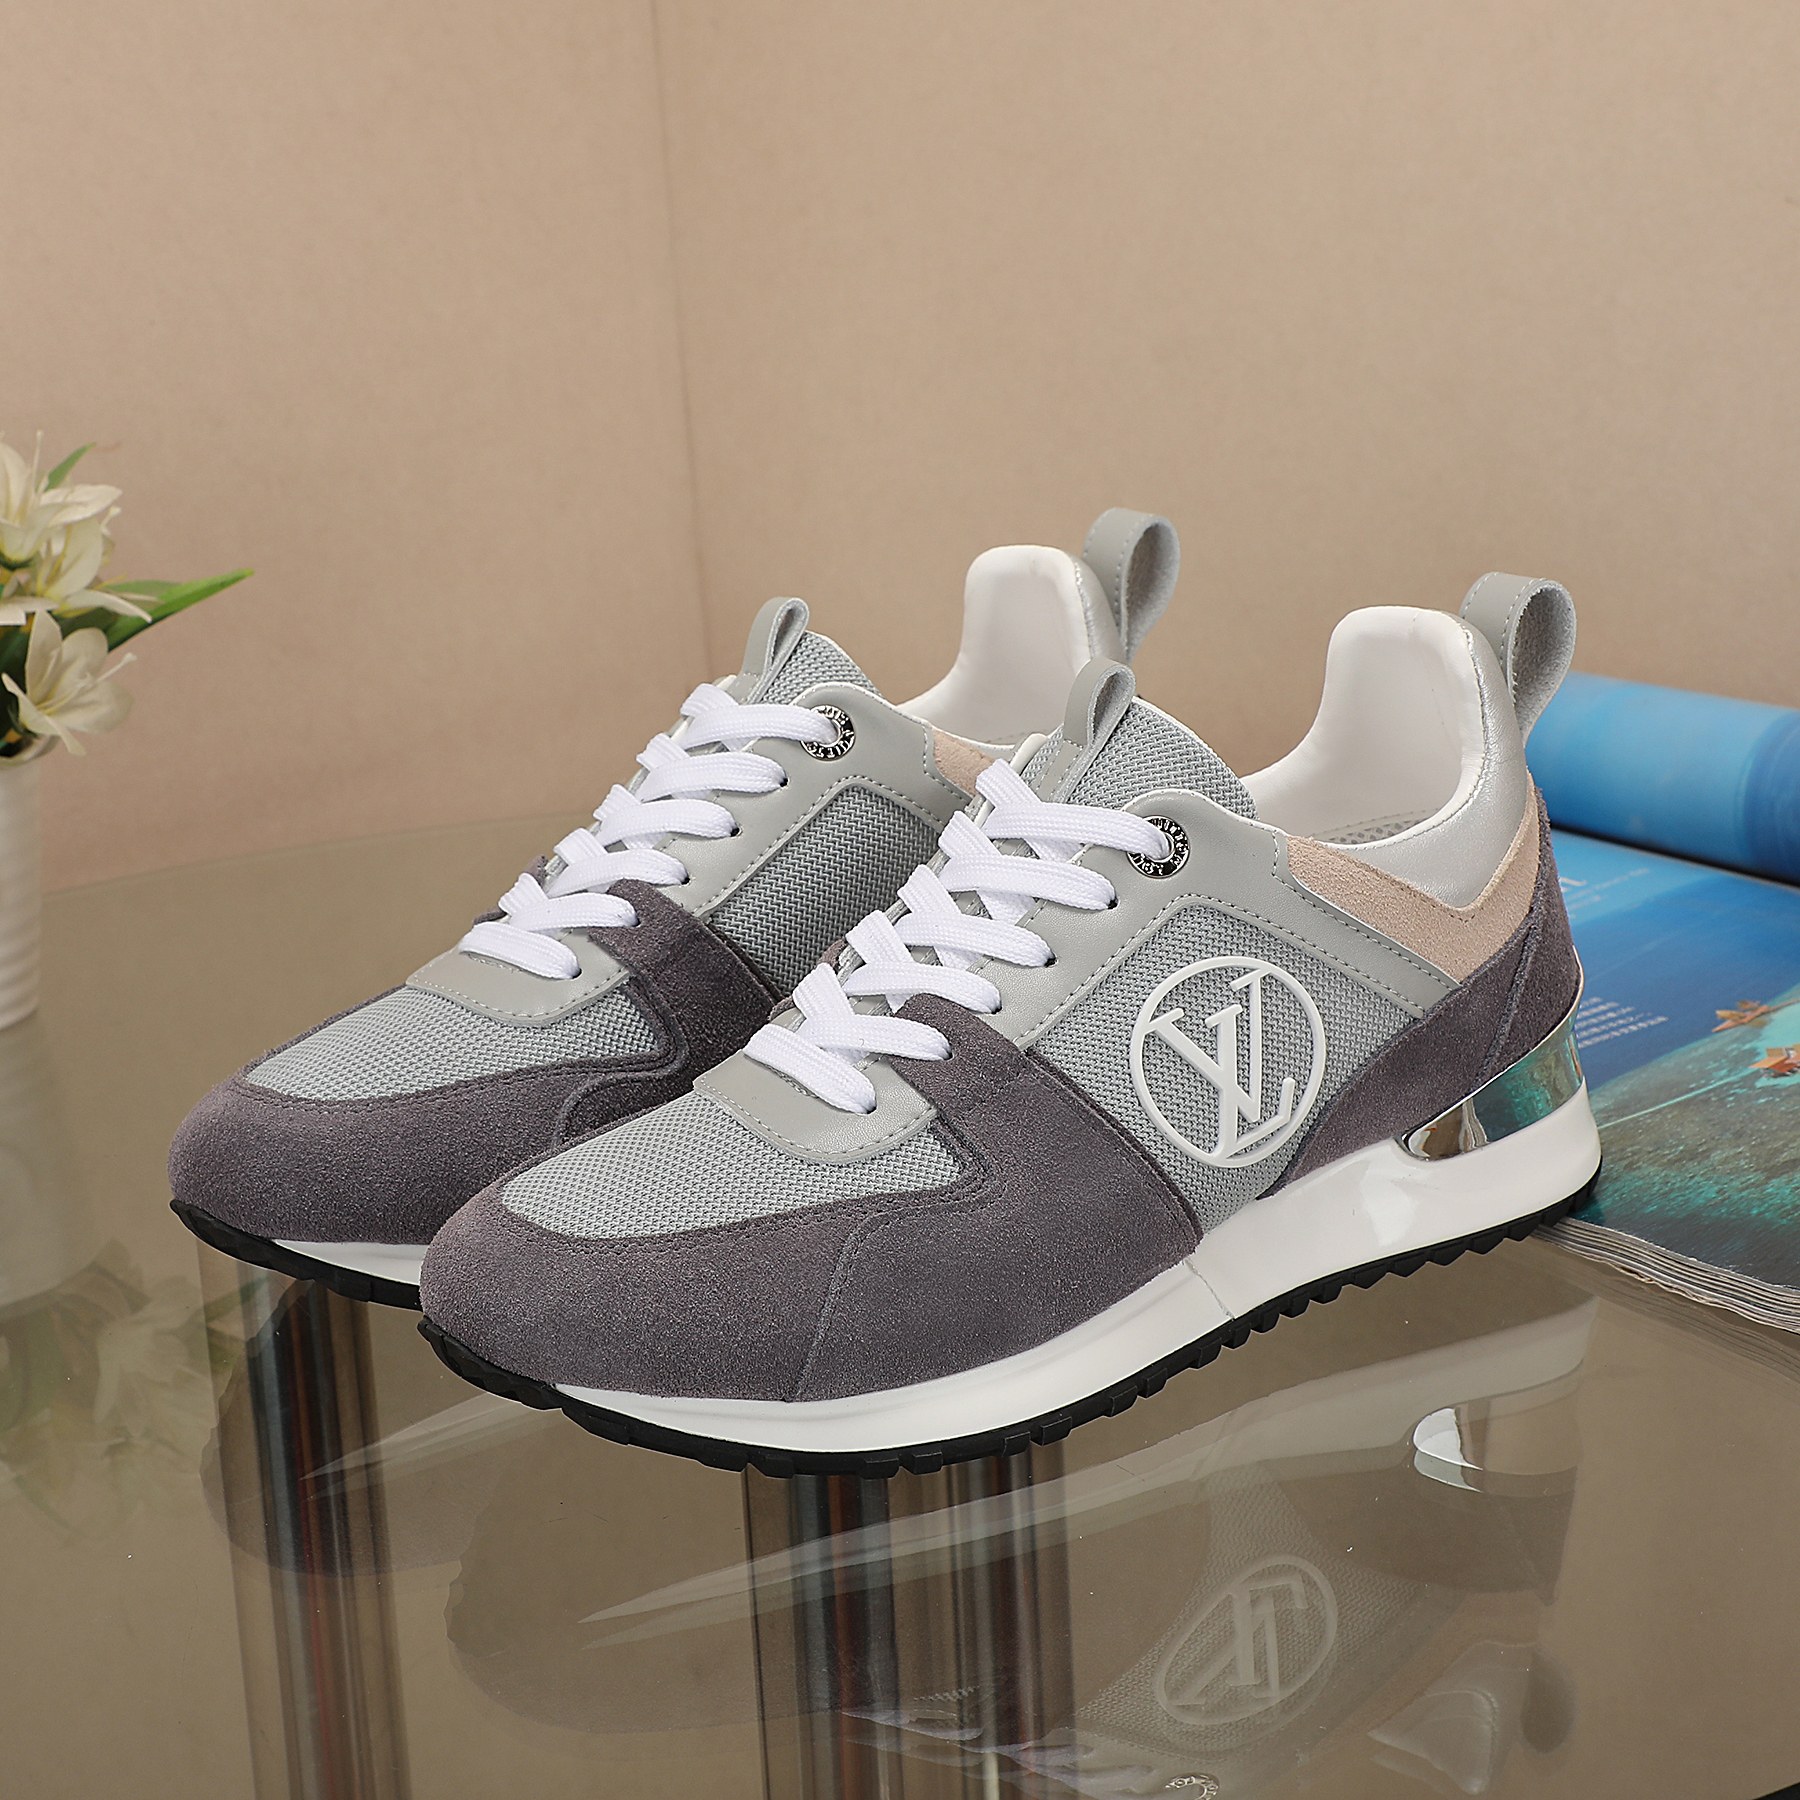 AL LV official website sync sneakers, this Run Away sneaker is inspired by running shoe design, high